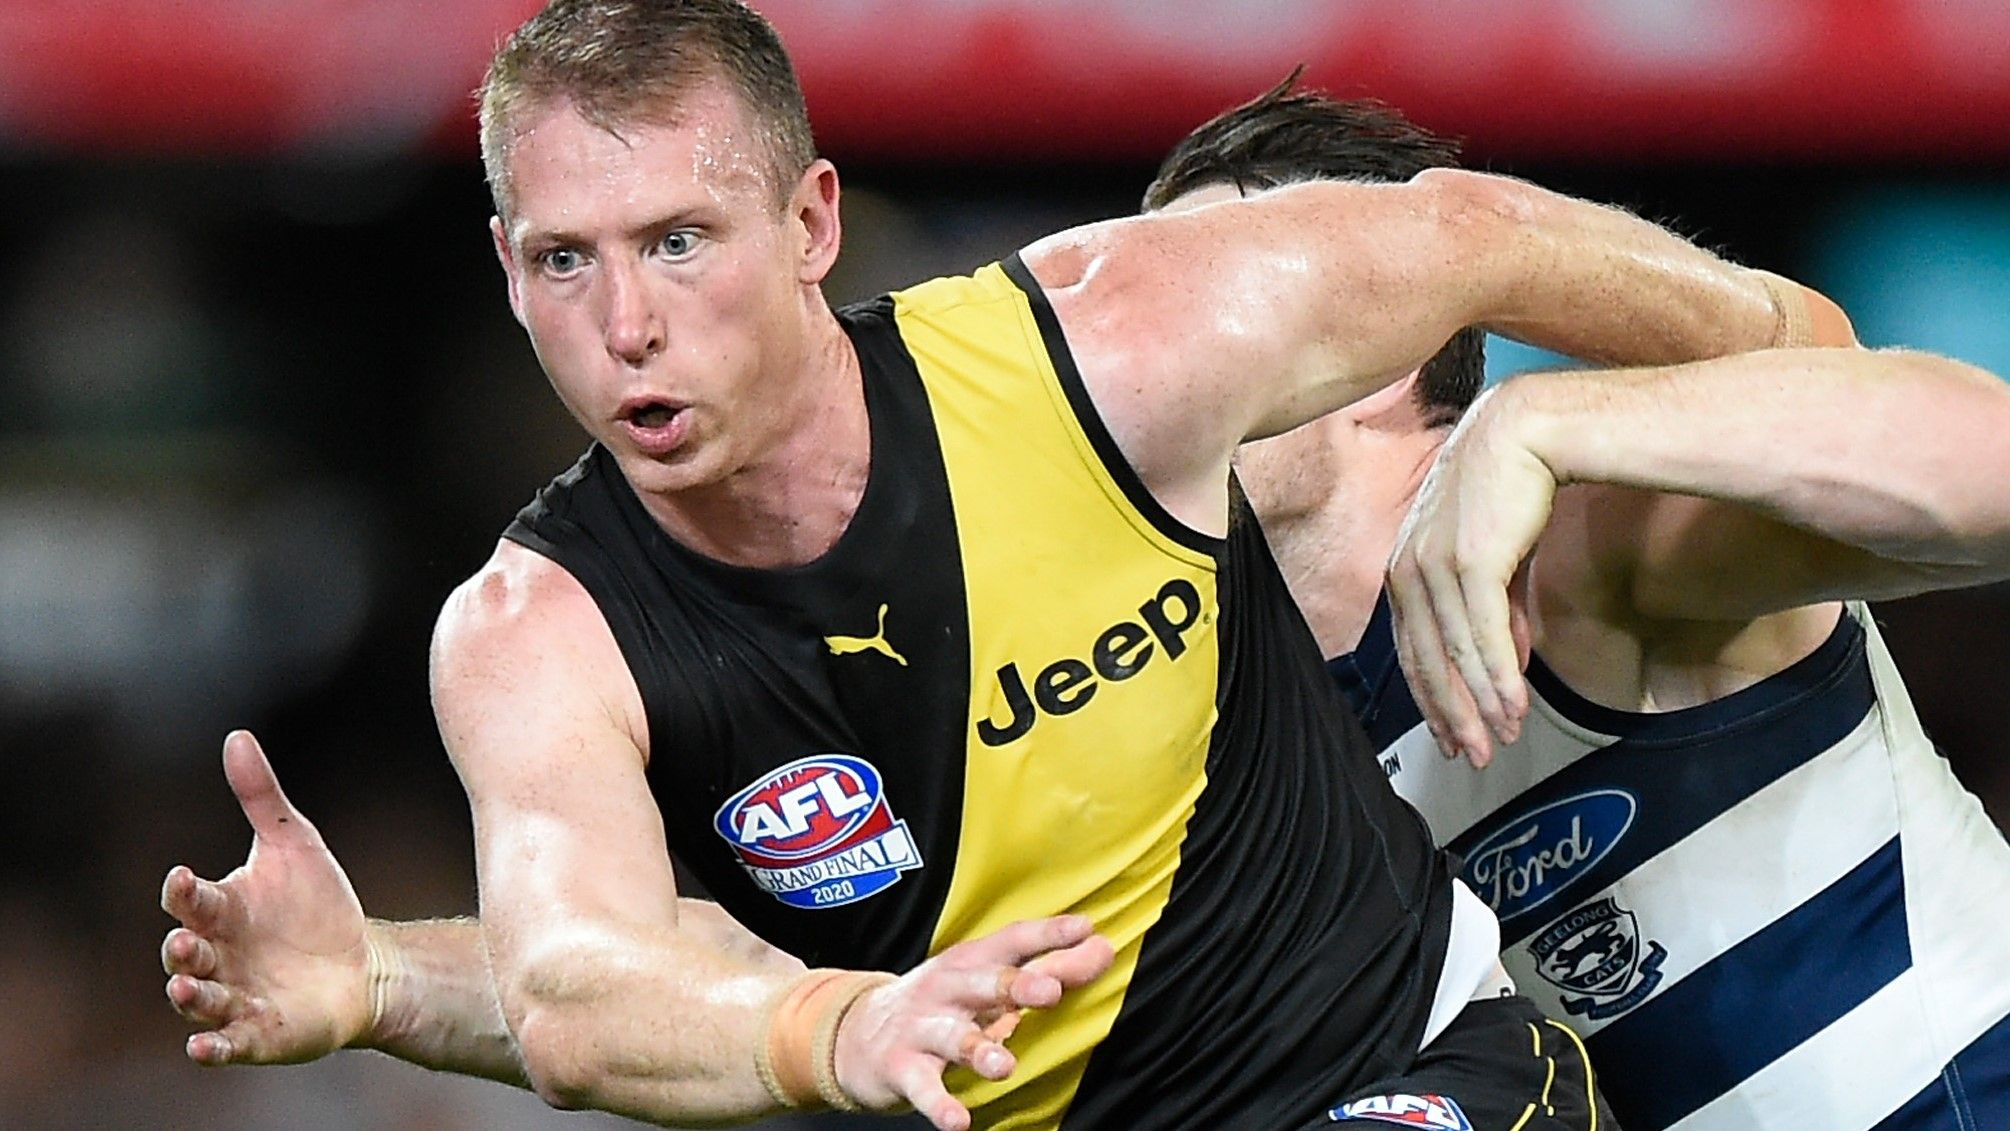 AFL denies biosecurity breach 'cover-up' after claims from Richmond's Dylan Grimes